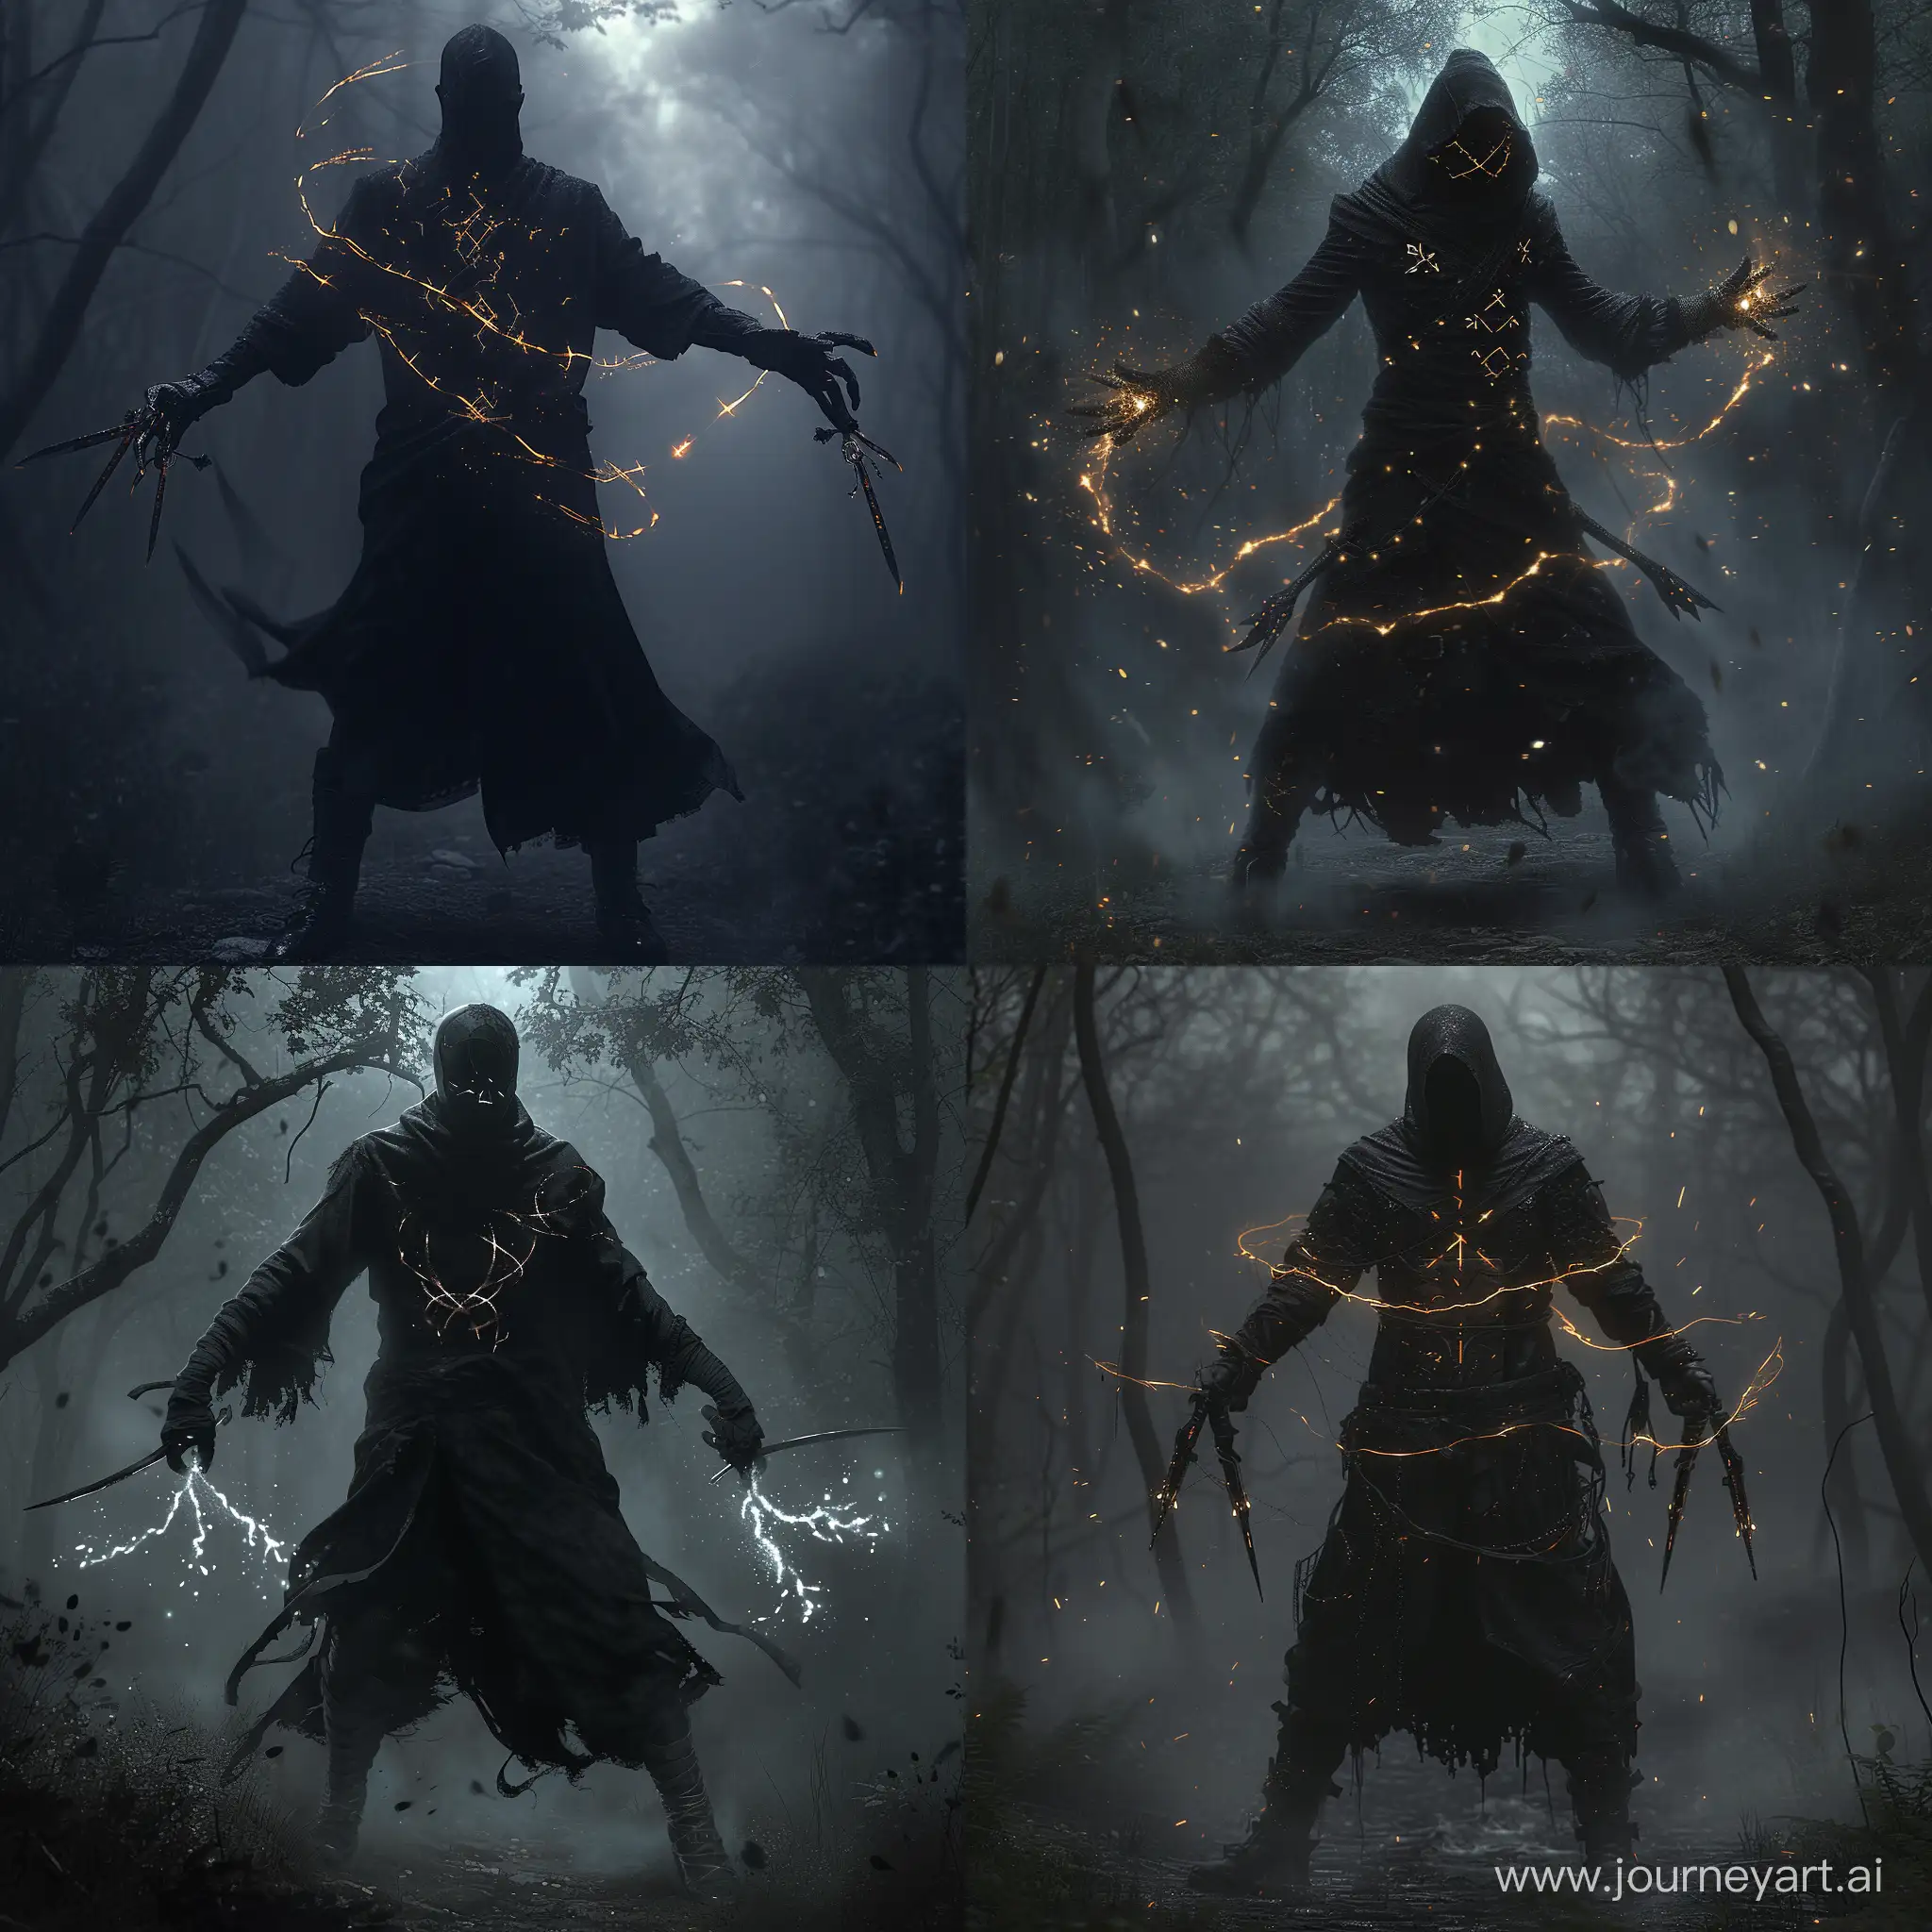 a man wearing, Midnight-black robe with glowing, arcane symbols, Shadowy, fingerless gloves channeling dark energy, Knee-high boots with concealed throwing knives, wielding dual daggers with a shadowy aura, standing in a dark and foggy forest,  bloodborne aesthetic, 1970's dark fantasy, detailed, cosmic horror, gritty, dark lighting, edgy